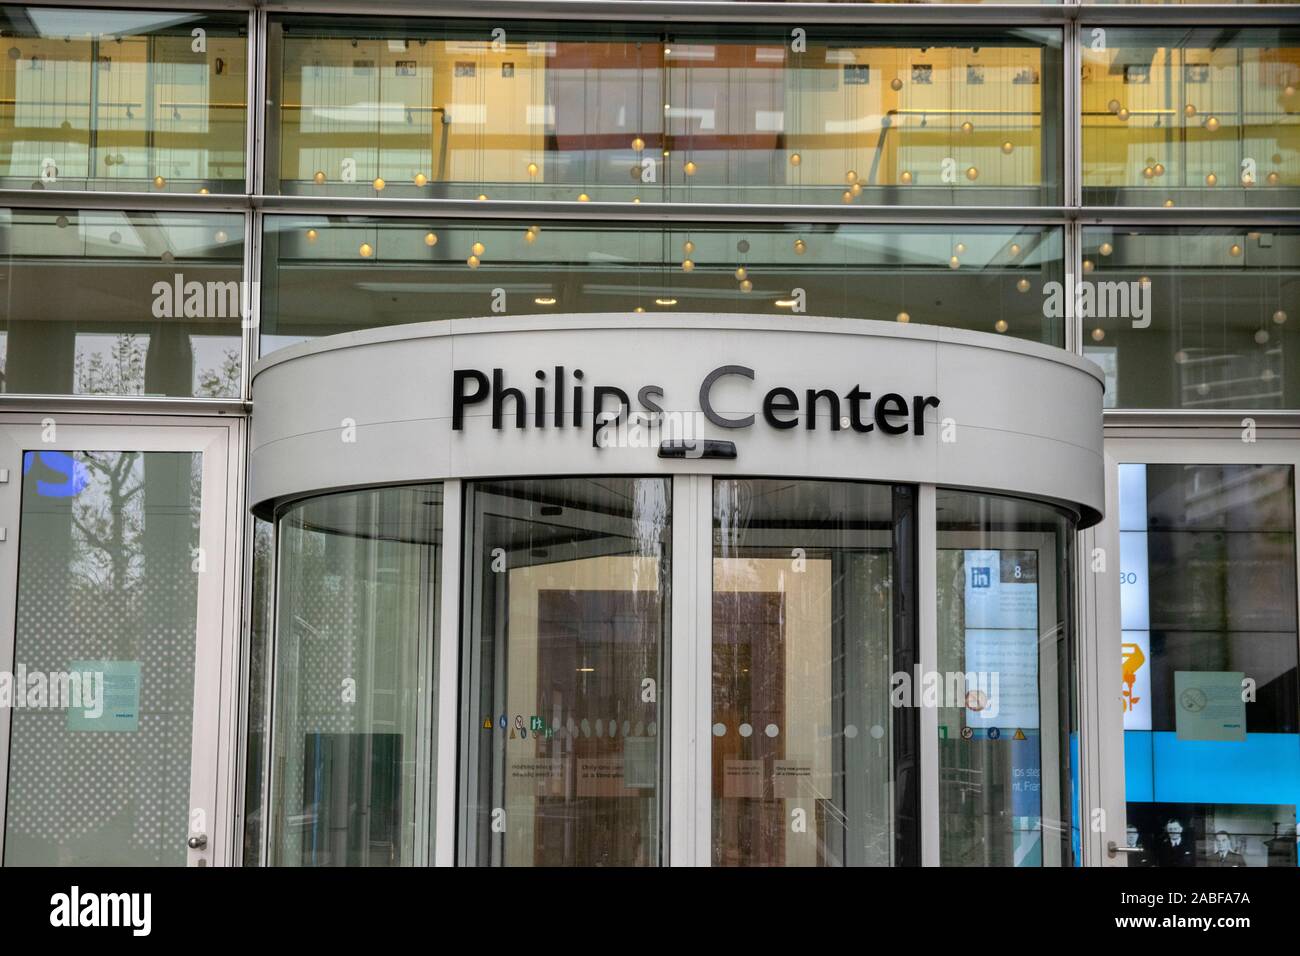 Entrance Philips Headquarters Building At Amsterdam The Netherlands entrance Philips Headquarters Building At Amsterdam The Netherlands 2019 Stock Photo